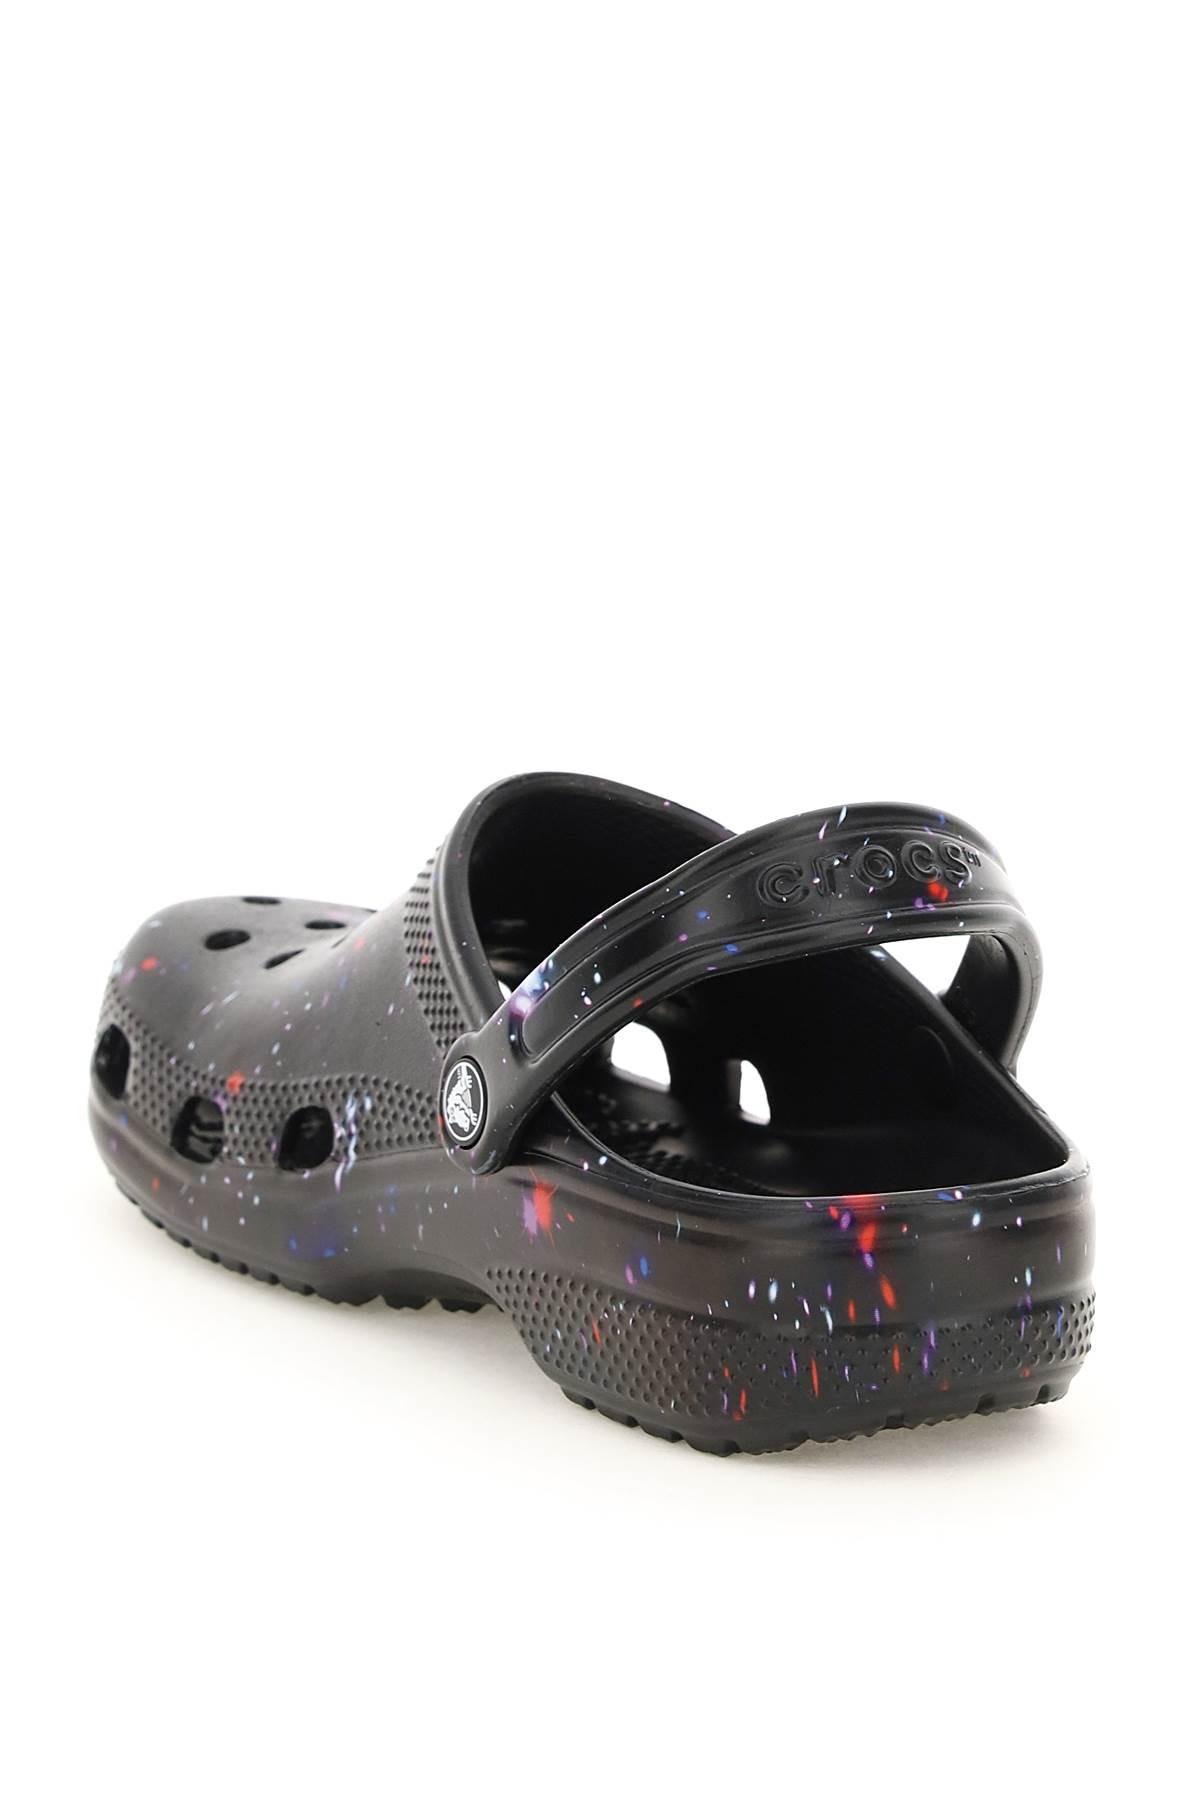 Classic Out of this World II Clog Crocs Shoes Clogs 